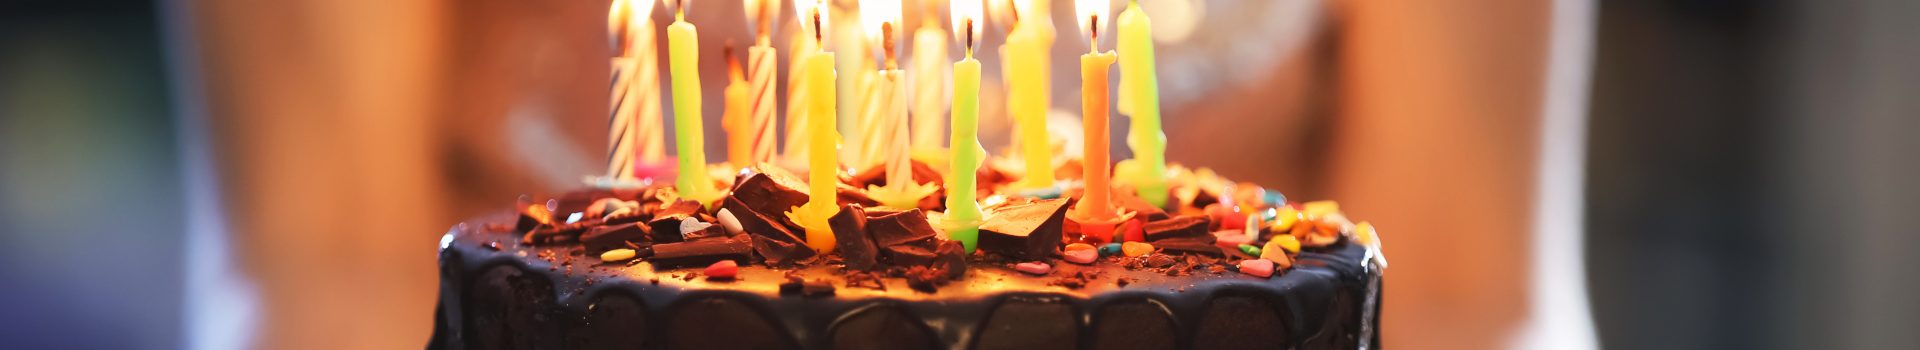 Chocolate birthday cake with lit candles